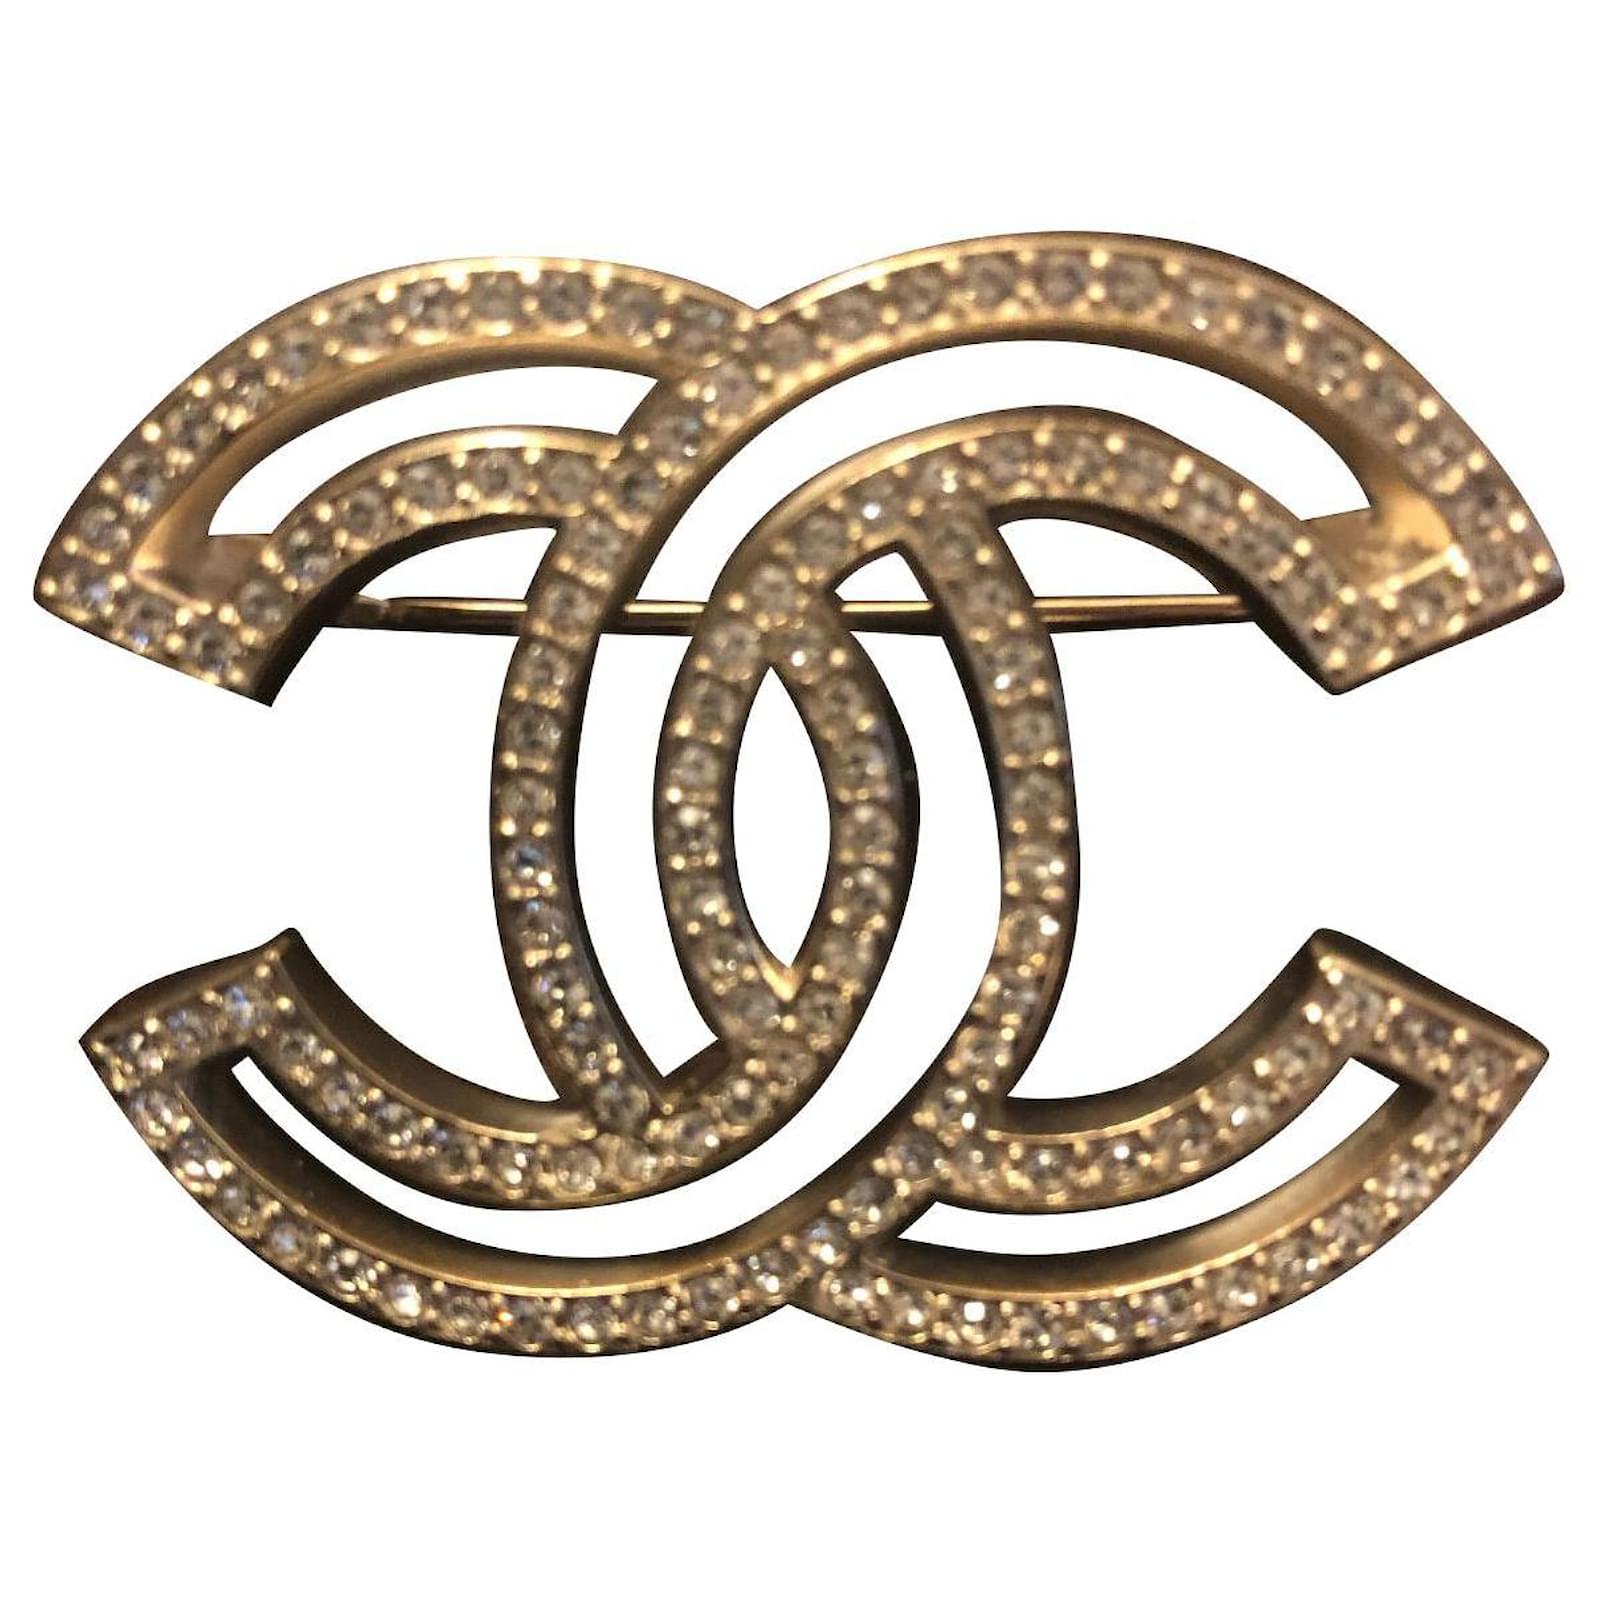 Pre-Owned Chanel brooch CHANEL pin here mark rhinestone gold white (Good) 